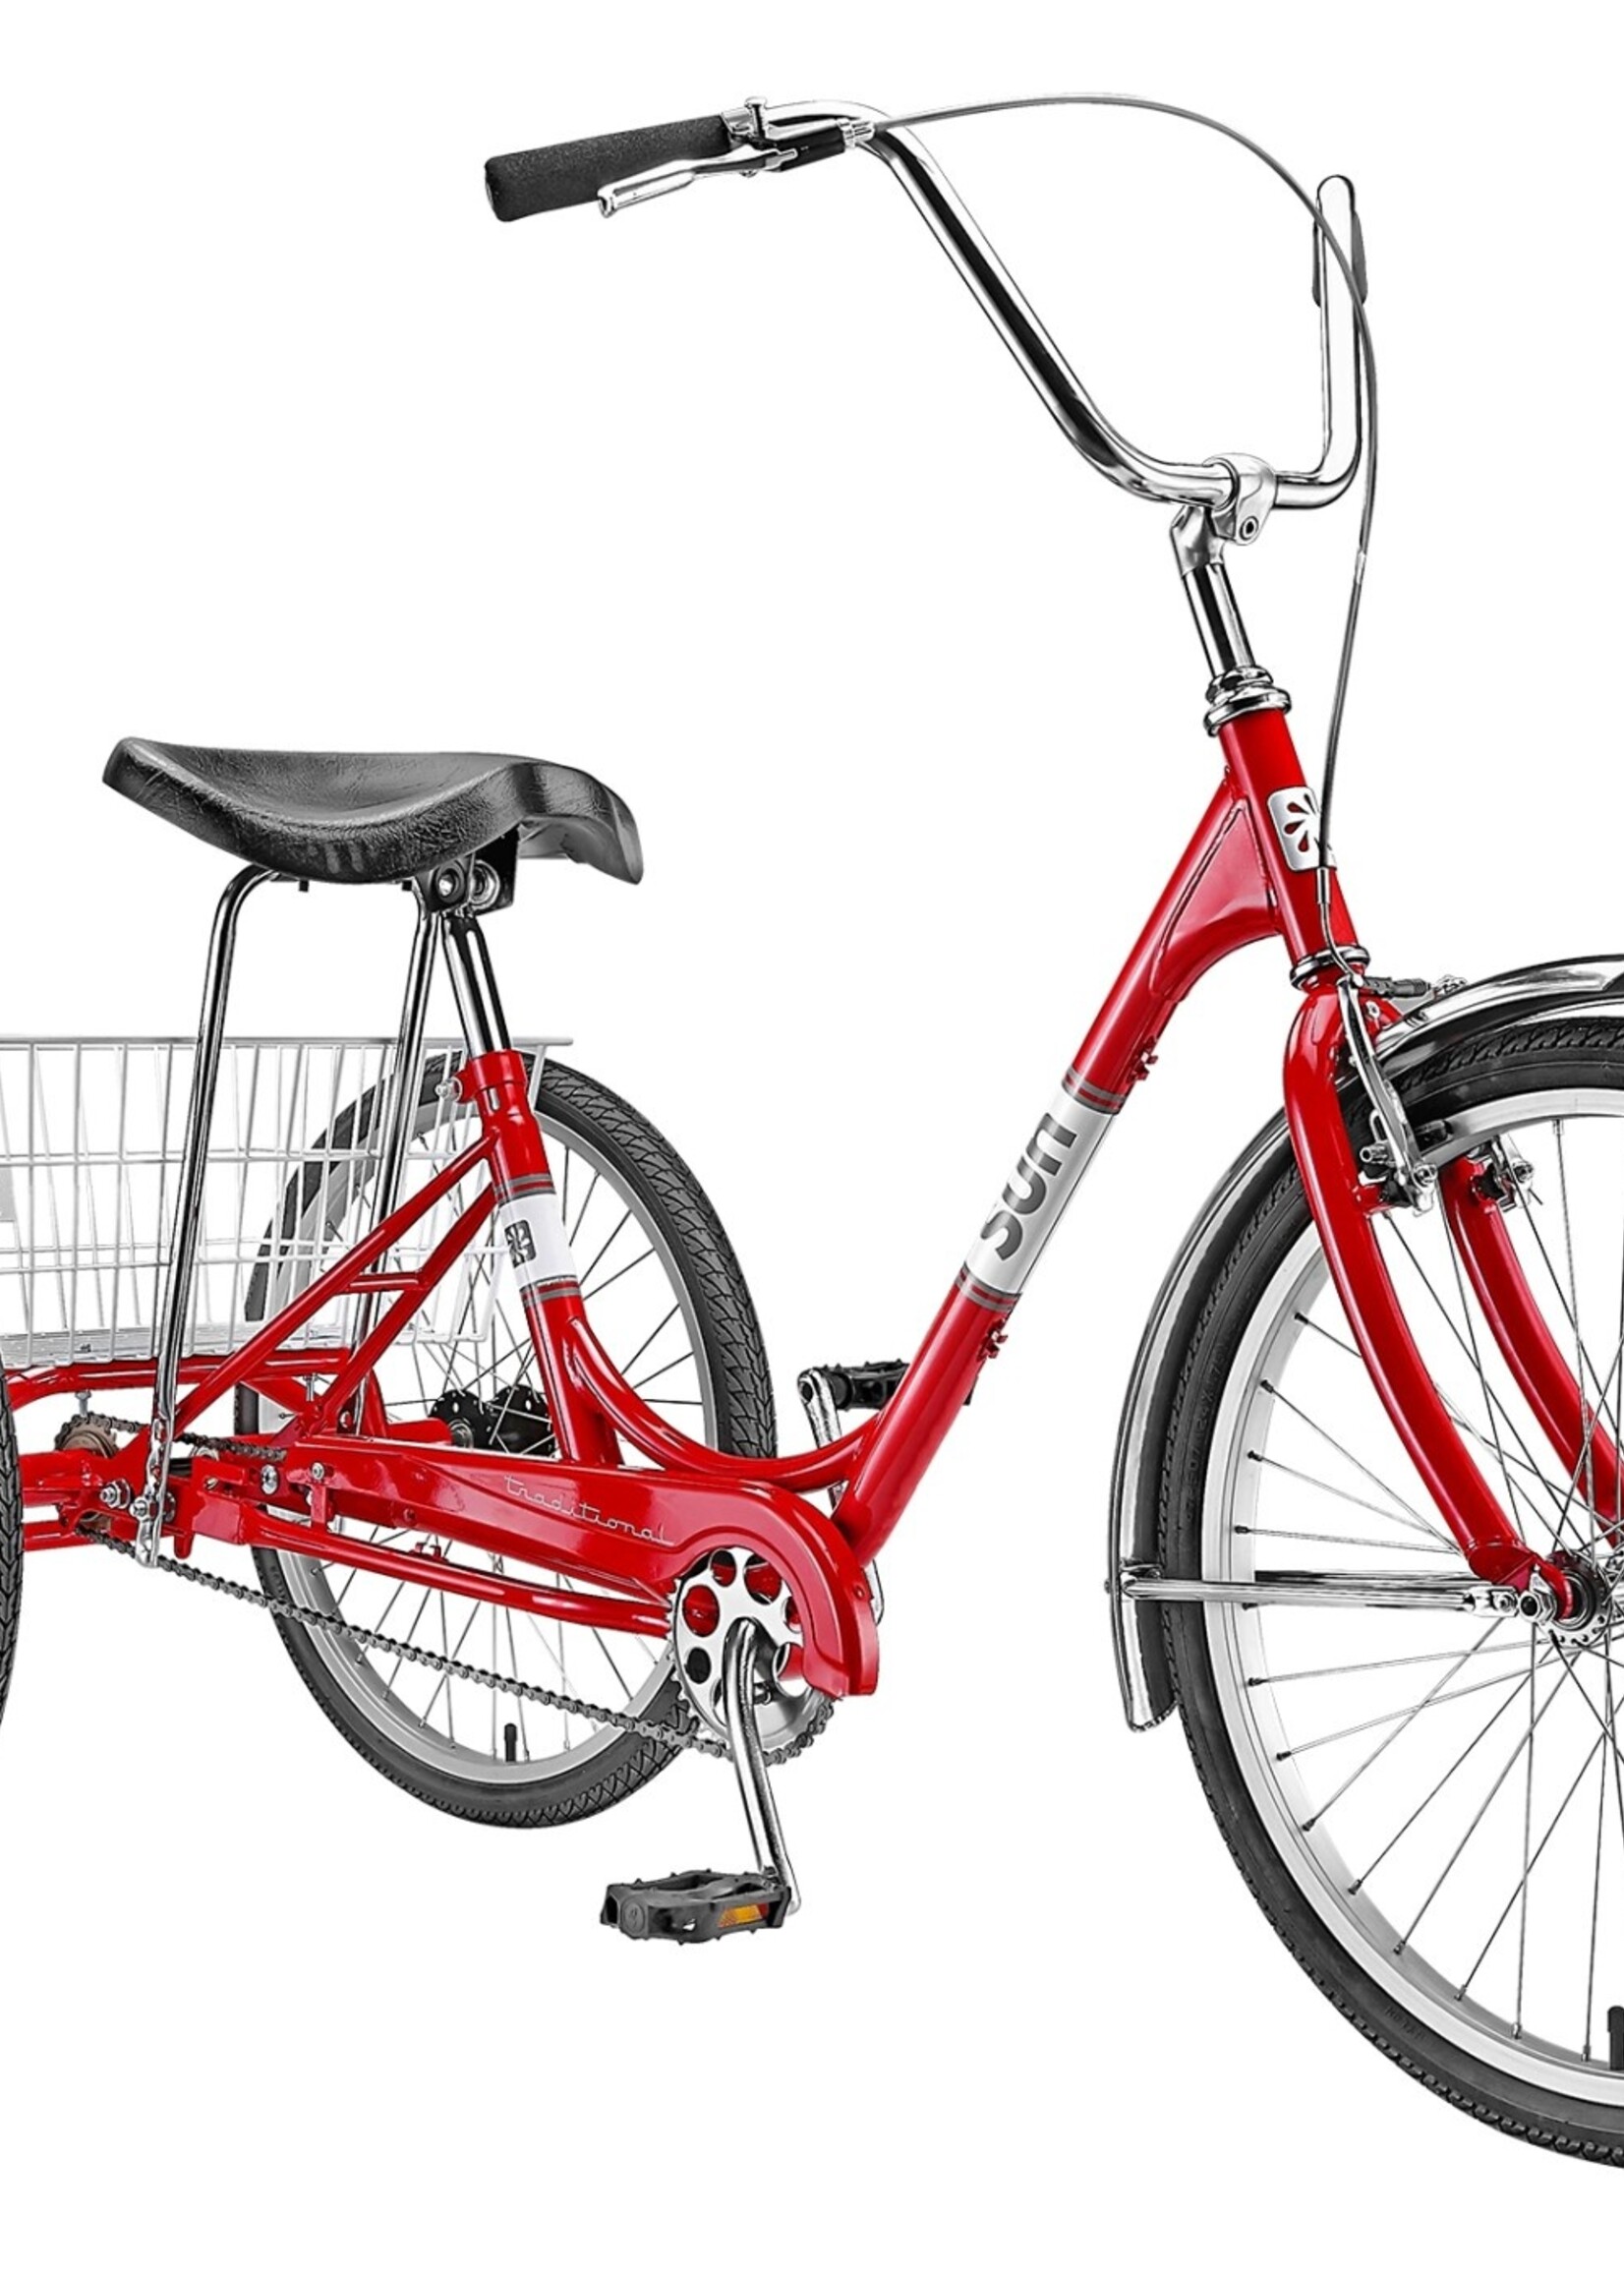 SUN BICYCLES SUN Traditional 1-Speed Trike, Red with White Basket